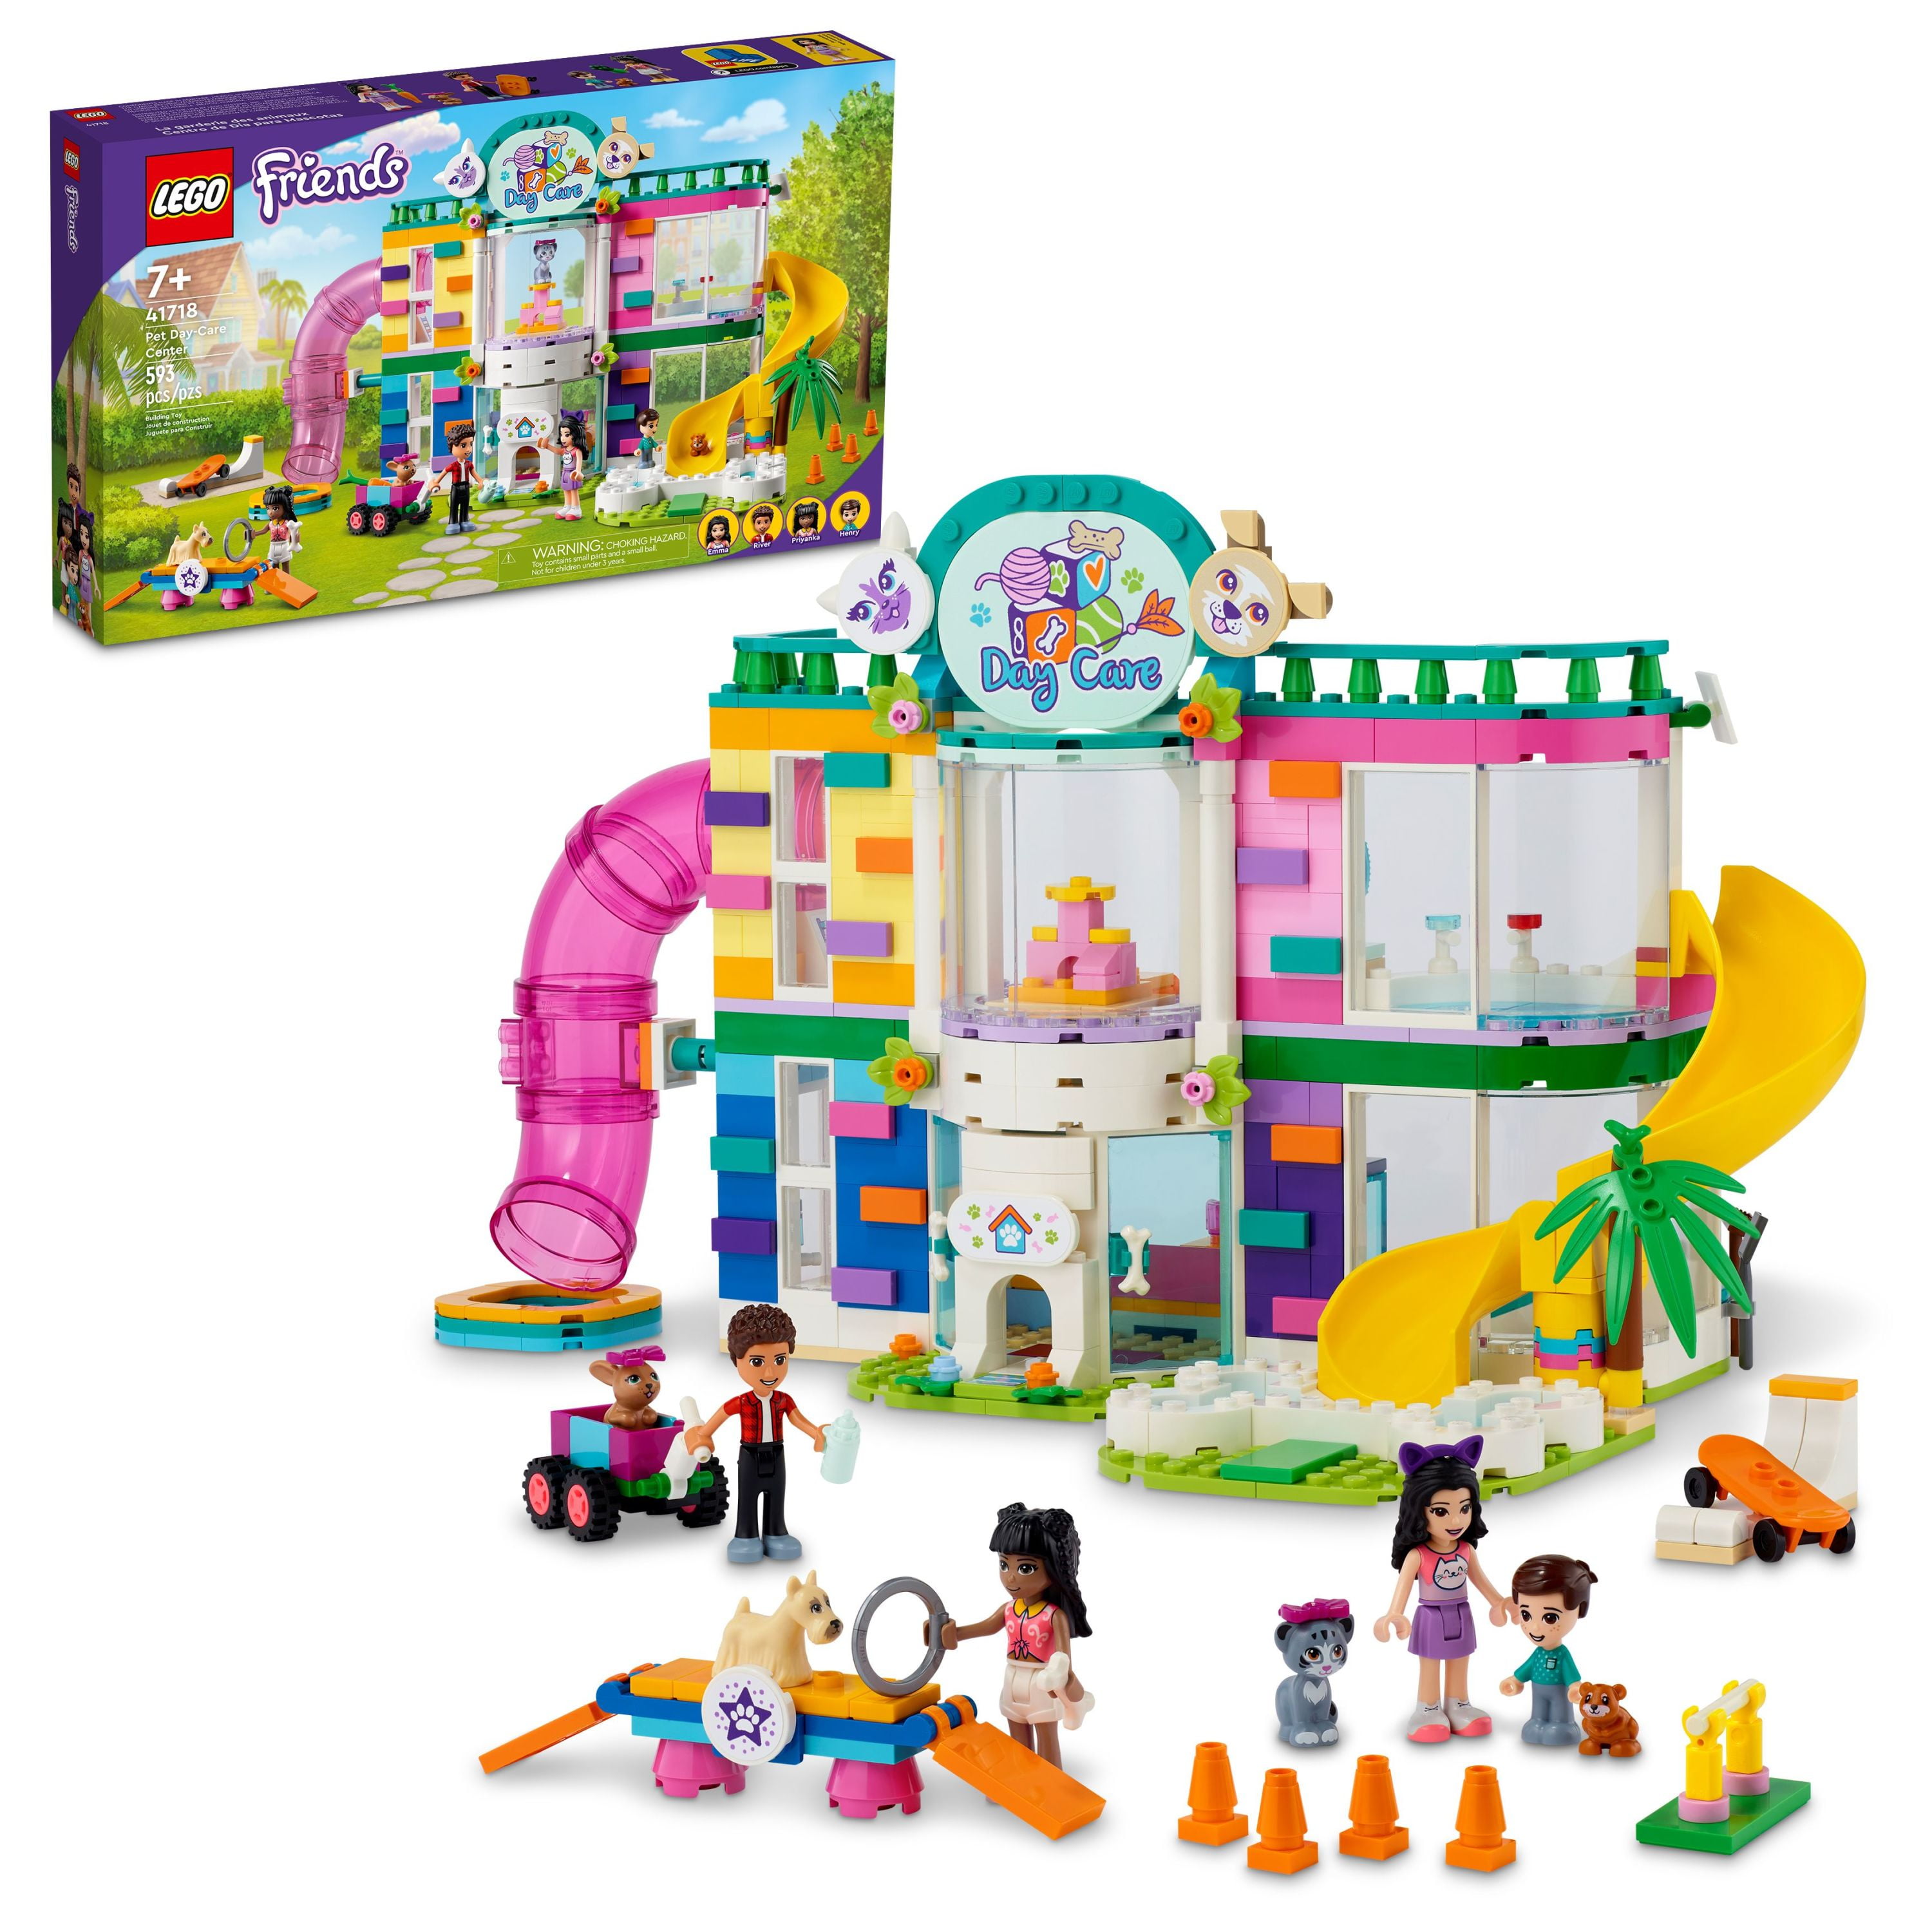 tsunamien Byttehandel fritaget LEGO Friends Pet Day-Care Center 41718 Animal Set, Heartlake City Toy,  Birthday Gifts for Kids, Girls and Boys 7 Plus Years Old, with Doggy Figure  & 3 Mini Dolls - Walmart.com